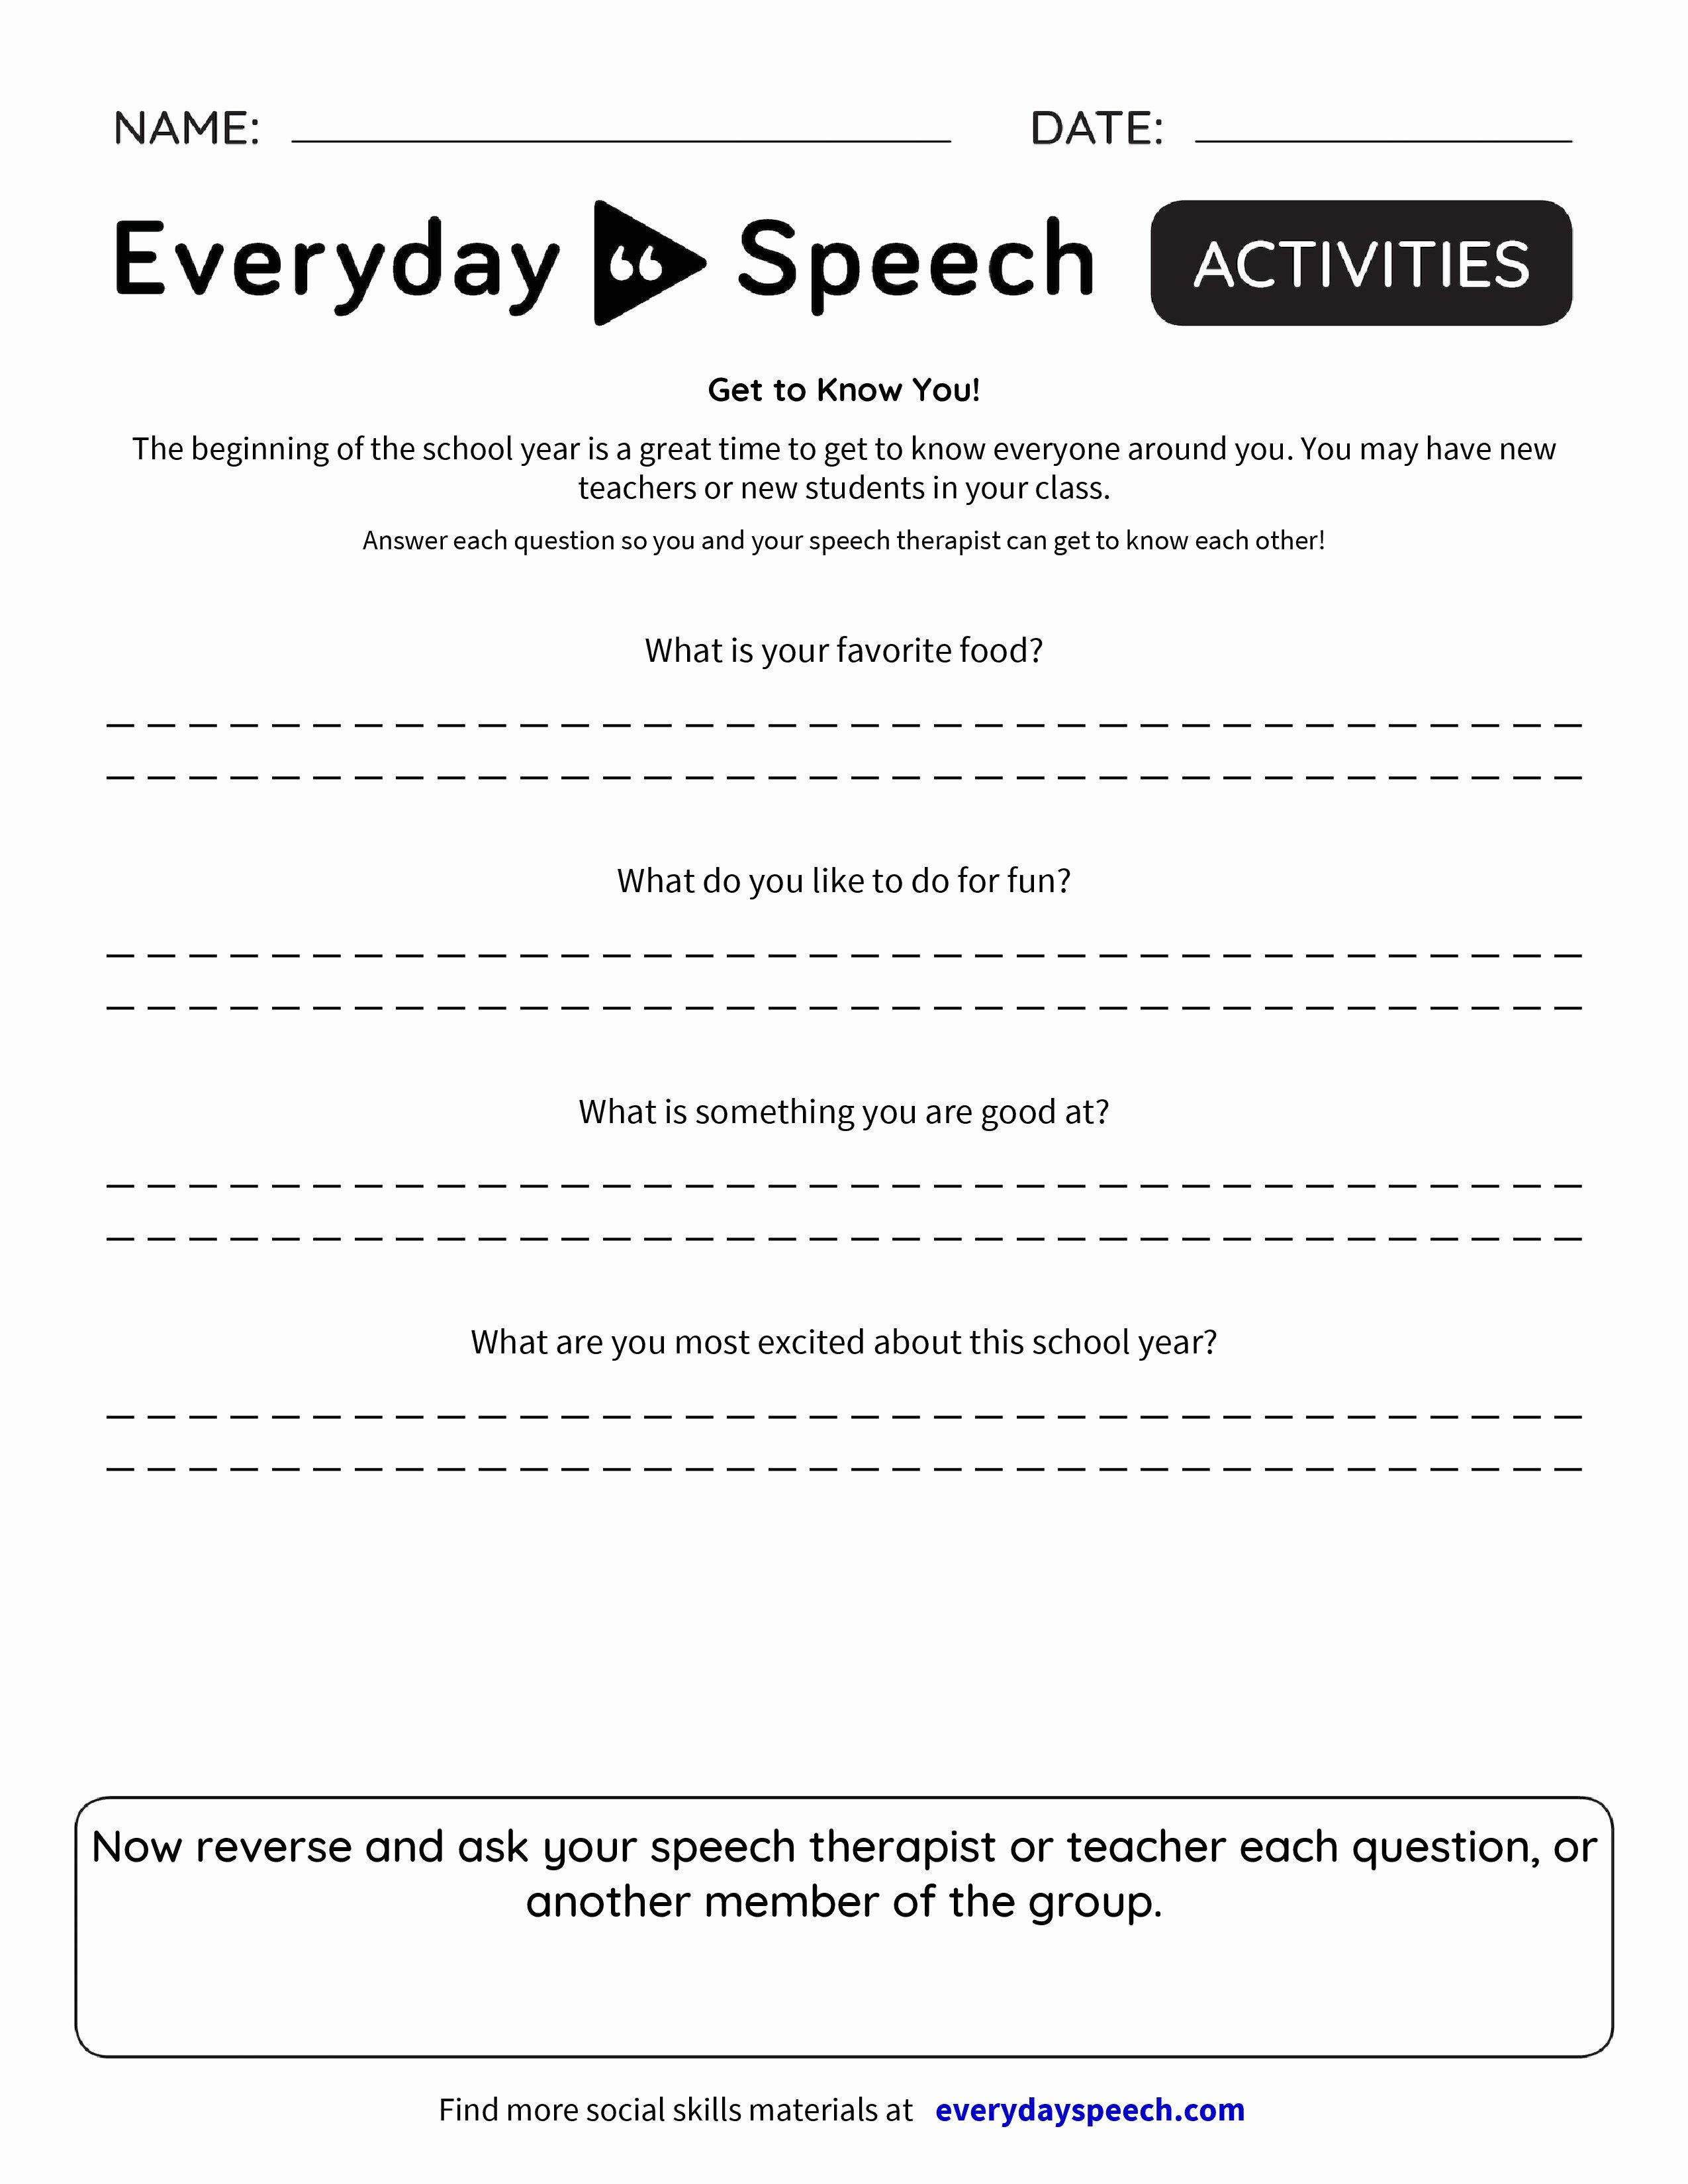 Getting to Know You Worksheet Fresh Get to Know You Everyday Speech Everyday Speech